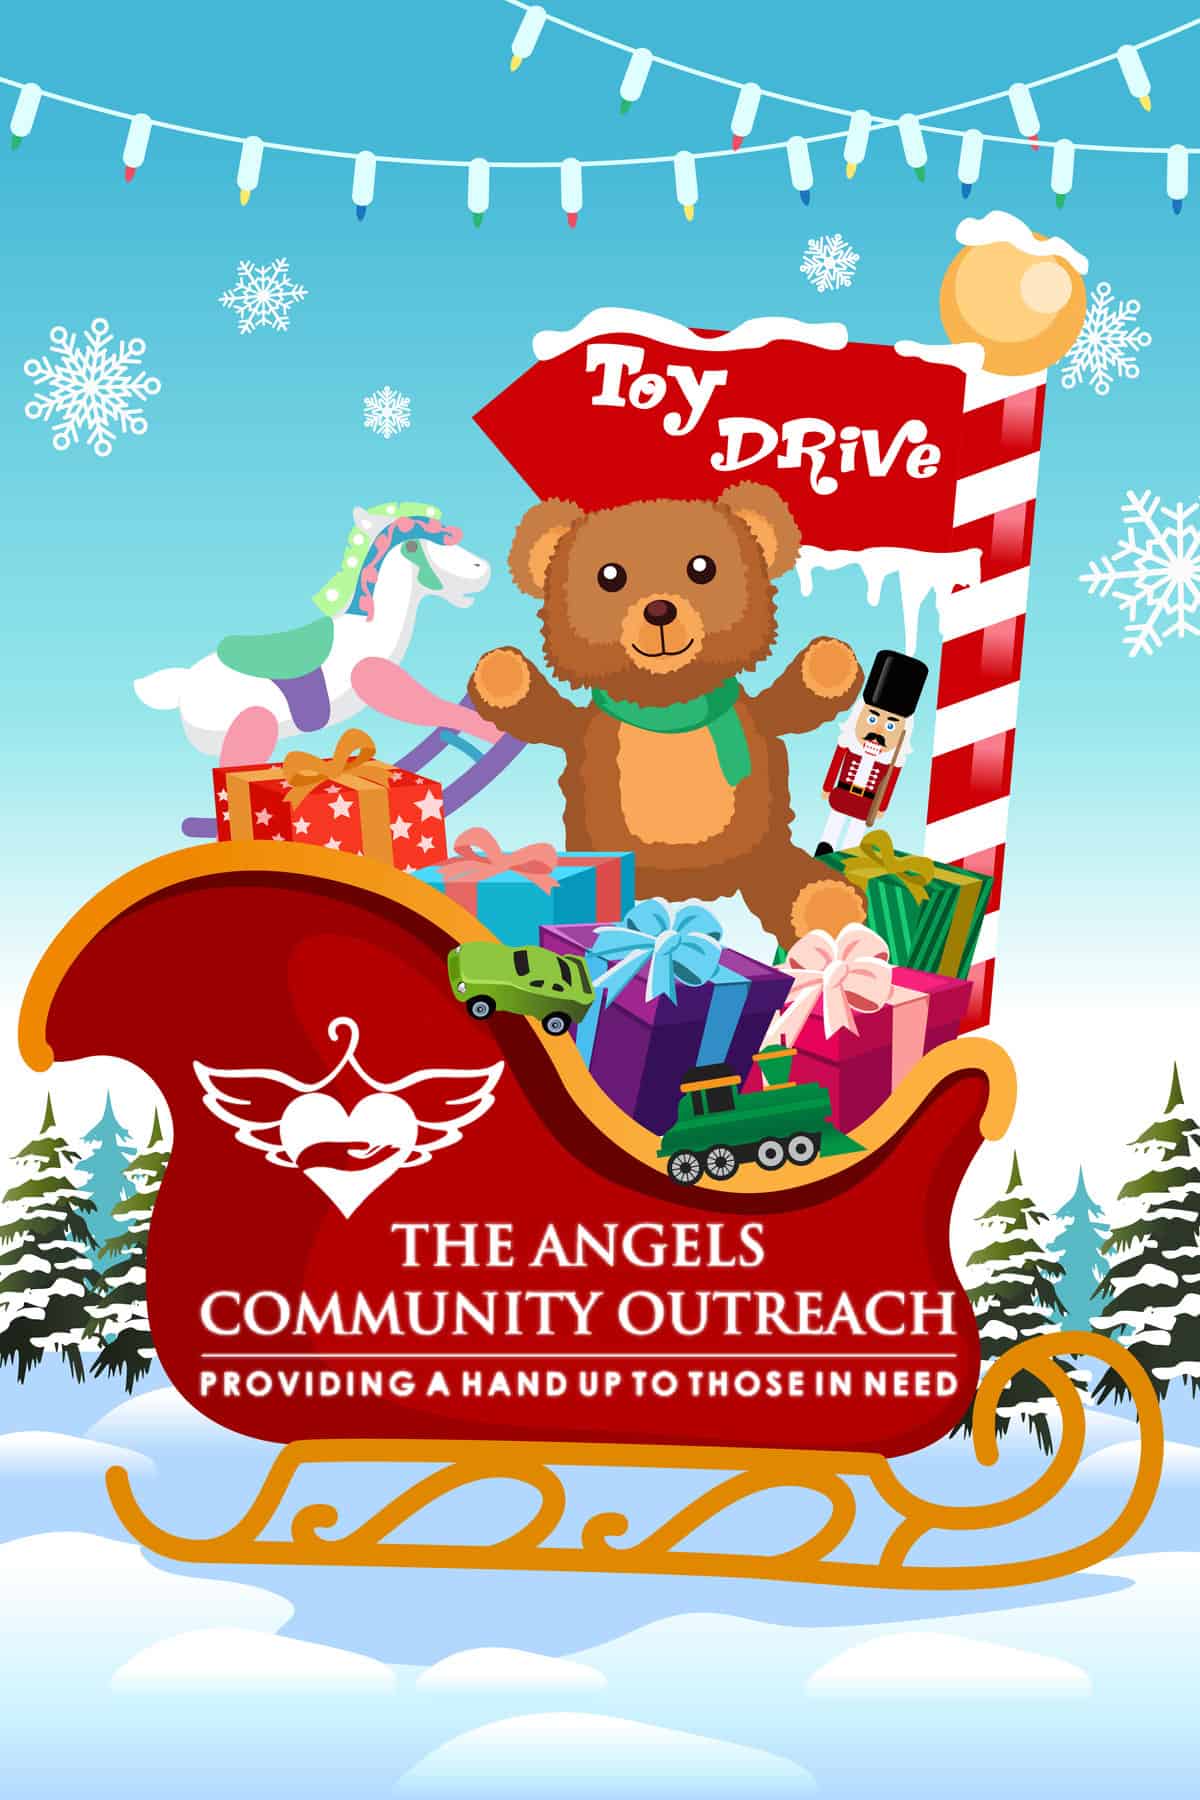 Would you like to HOST A TOY DRIVE?